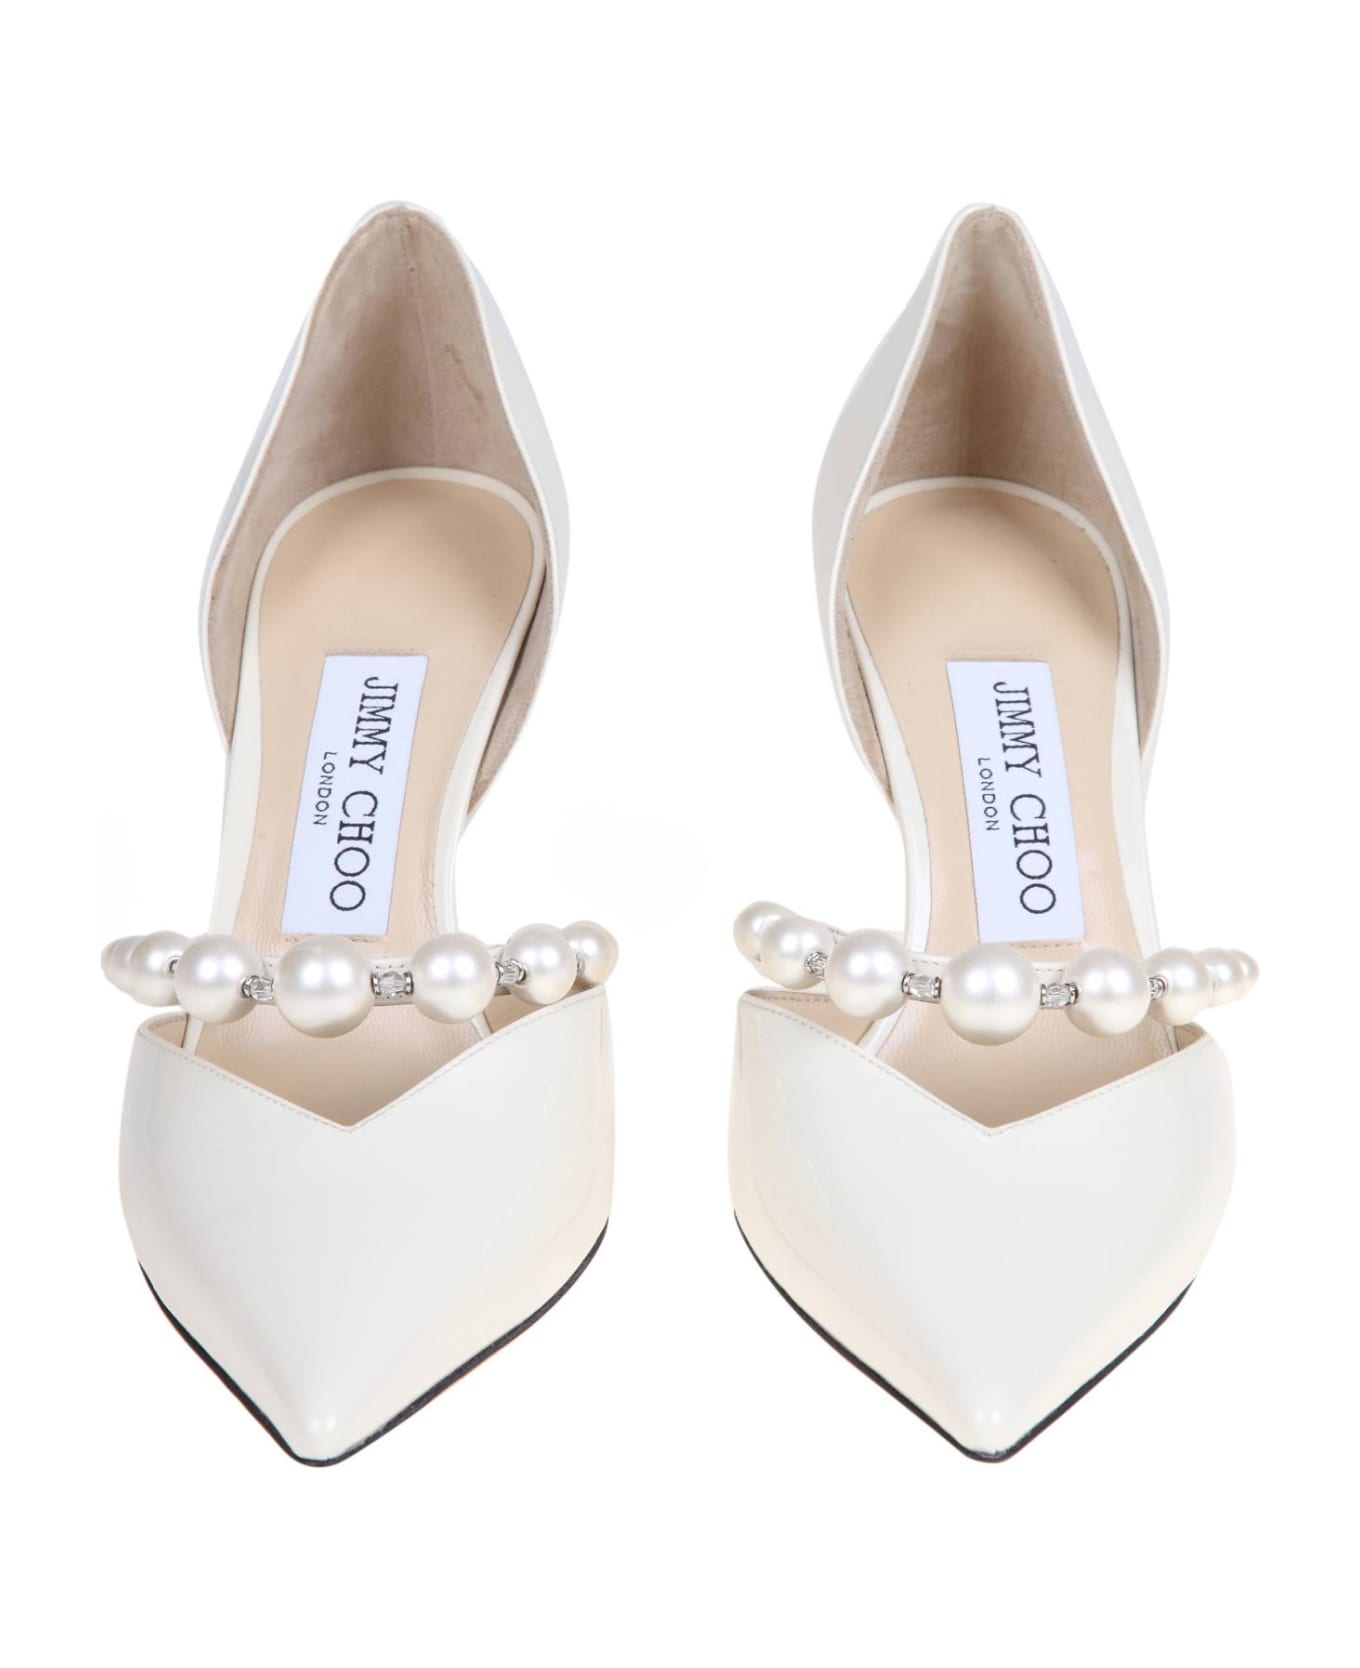 Jimmy Choo Aurelie 85 Patent Leather Pumps With Applied Pearls ハイヒール